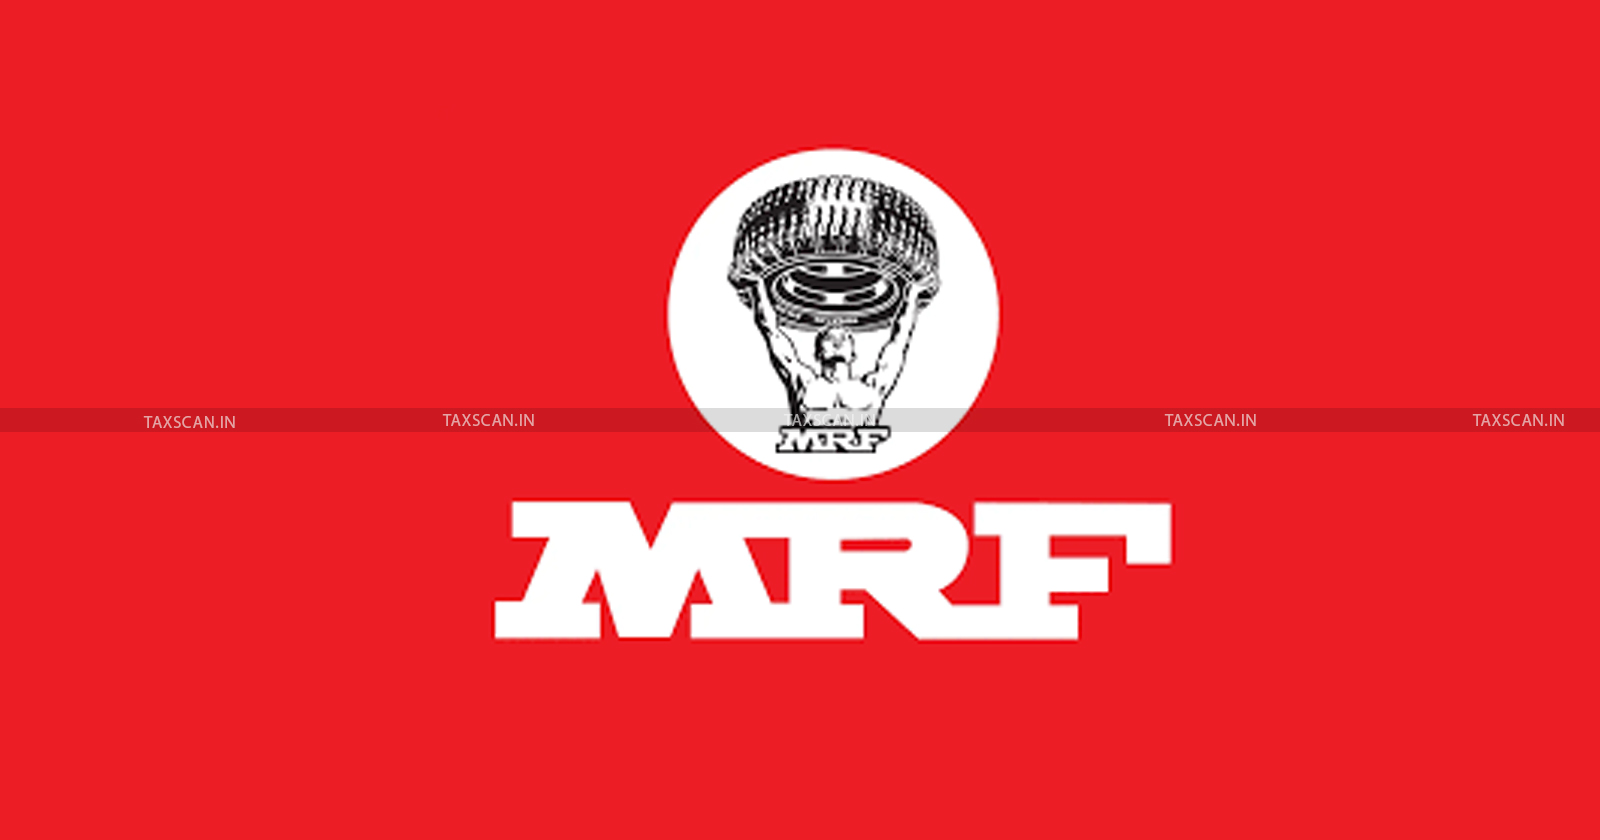 206 Mrf Images, Stock Photos, 3D objects, & Vectors | Shutterstock